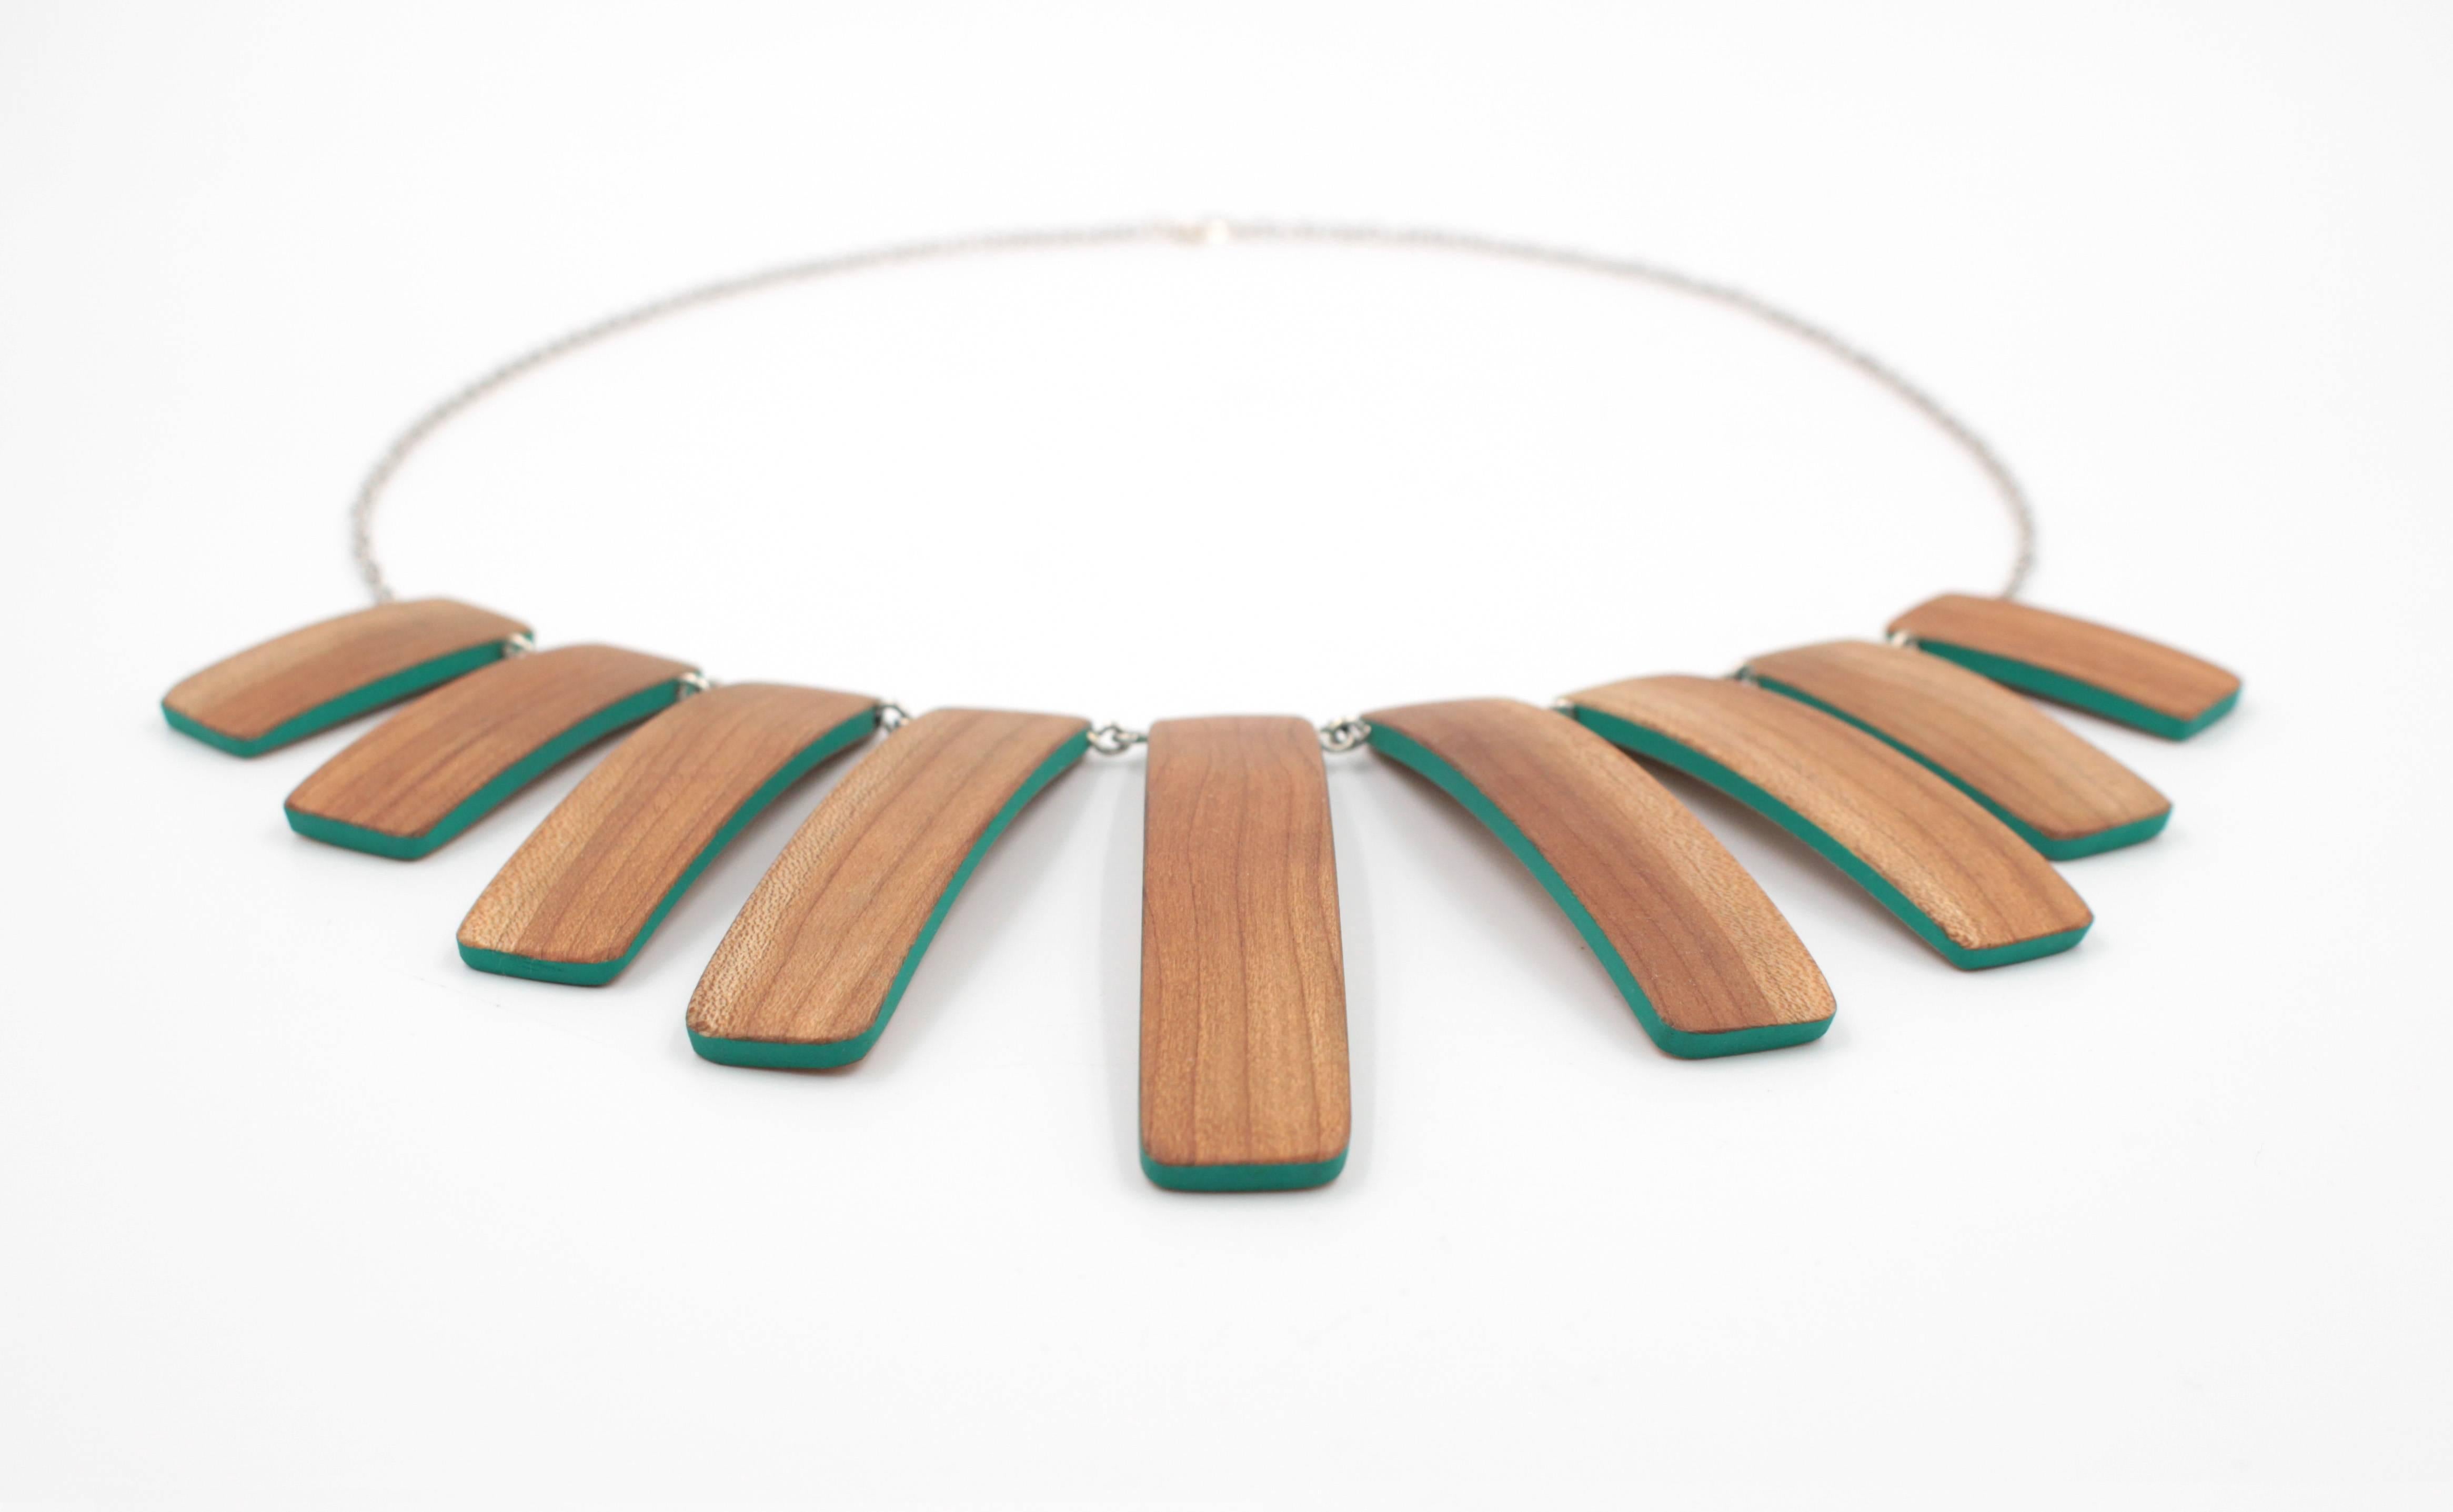 Handmade wooden "ribs" with blue-green accents.